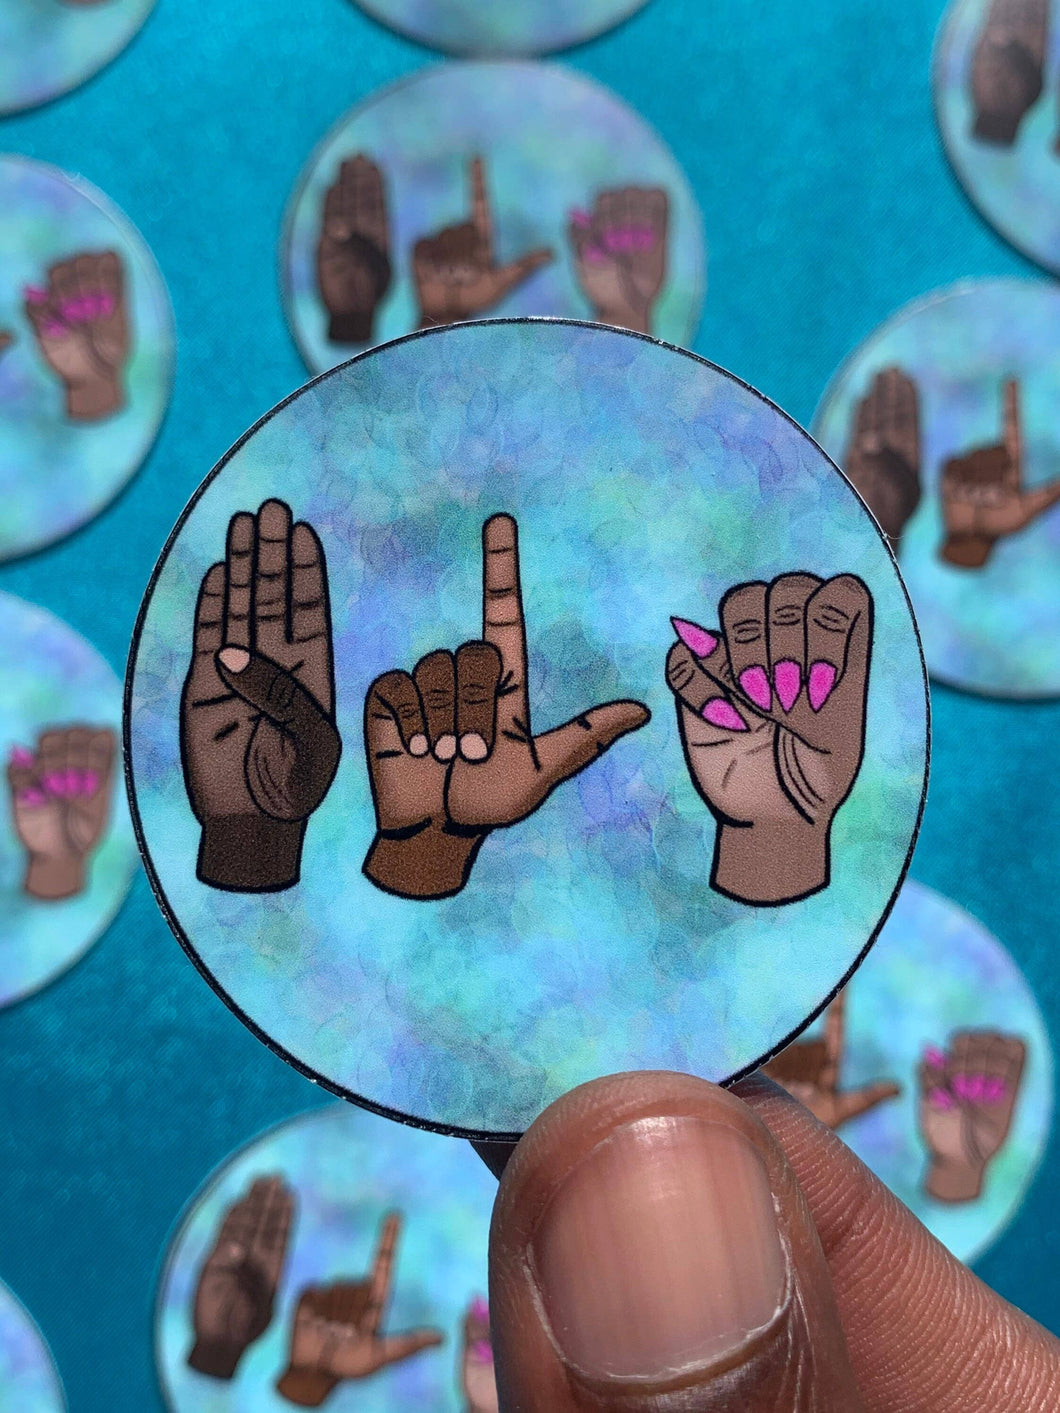 BLM Sign Language Sticker | Jammin for Justice - Paperbacks & Frybread Co.